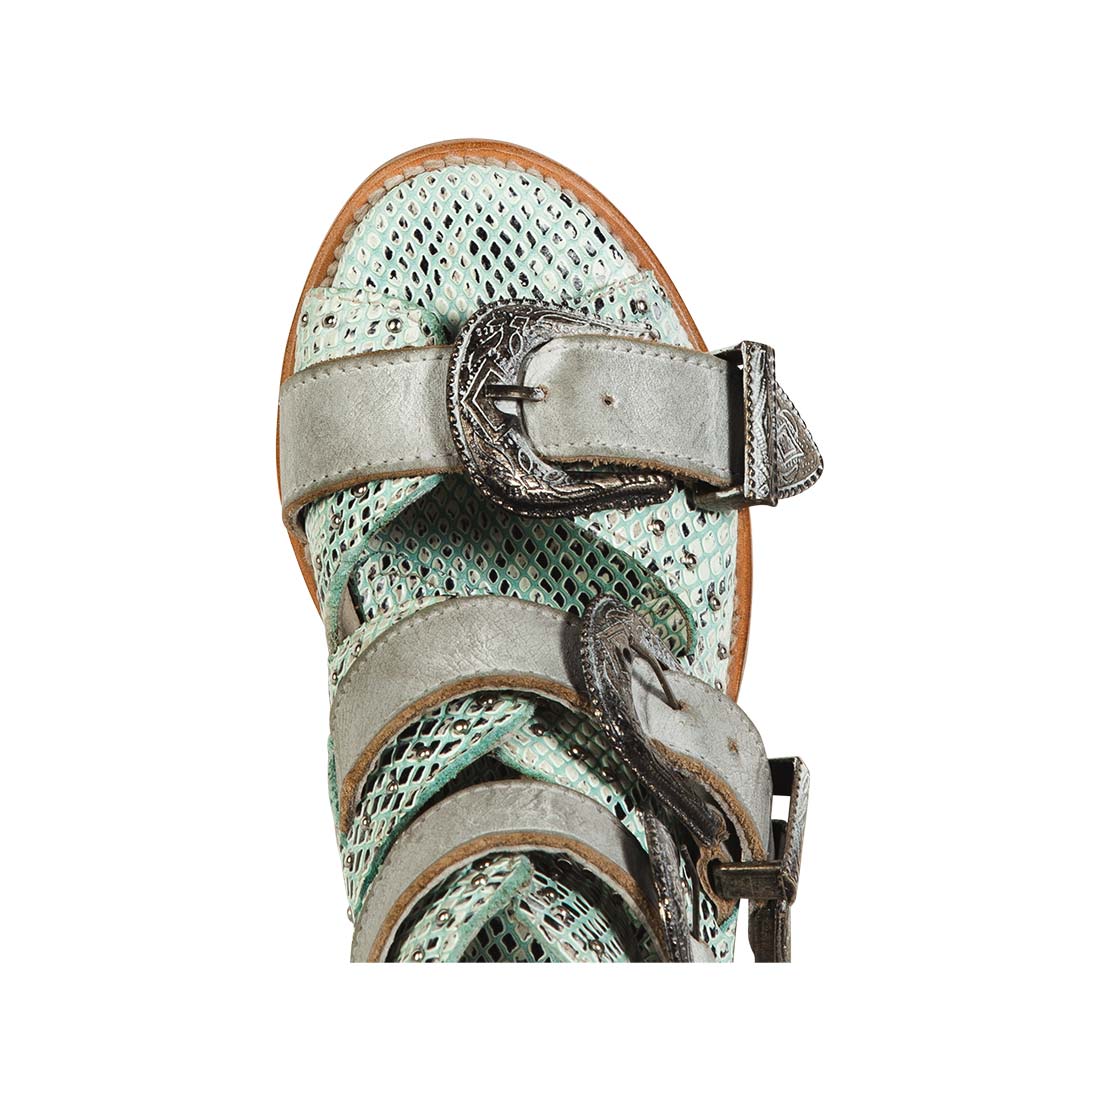 Top view showing open toe and engraved silver buckles on FREEBIRD women's Violet turquoise snake sandal